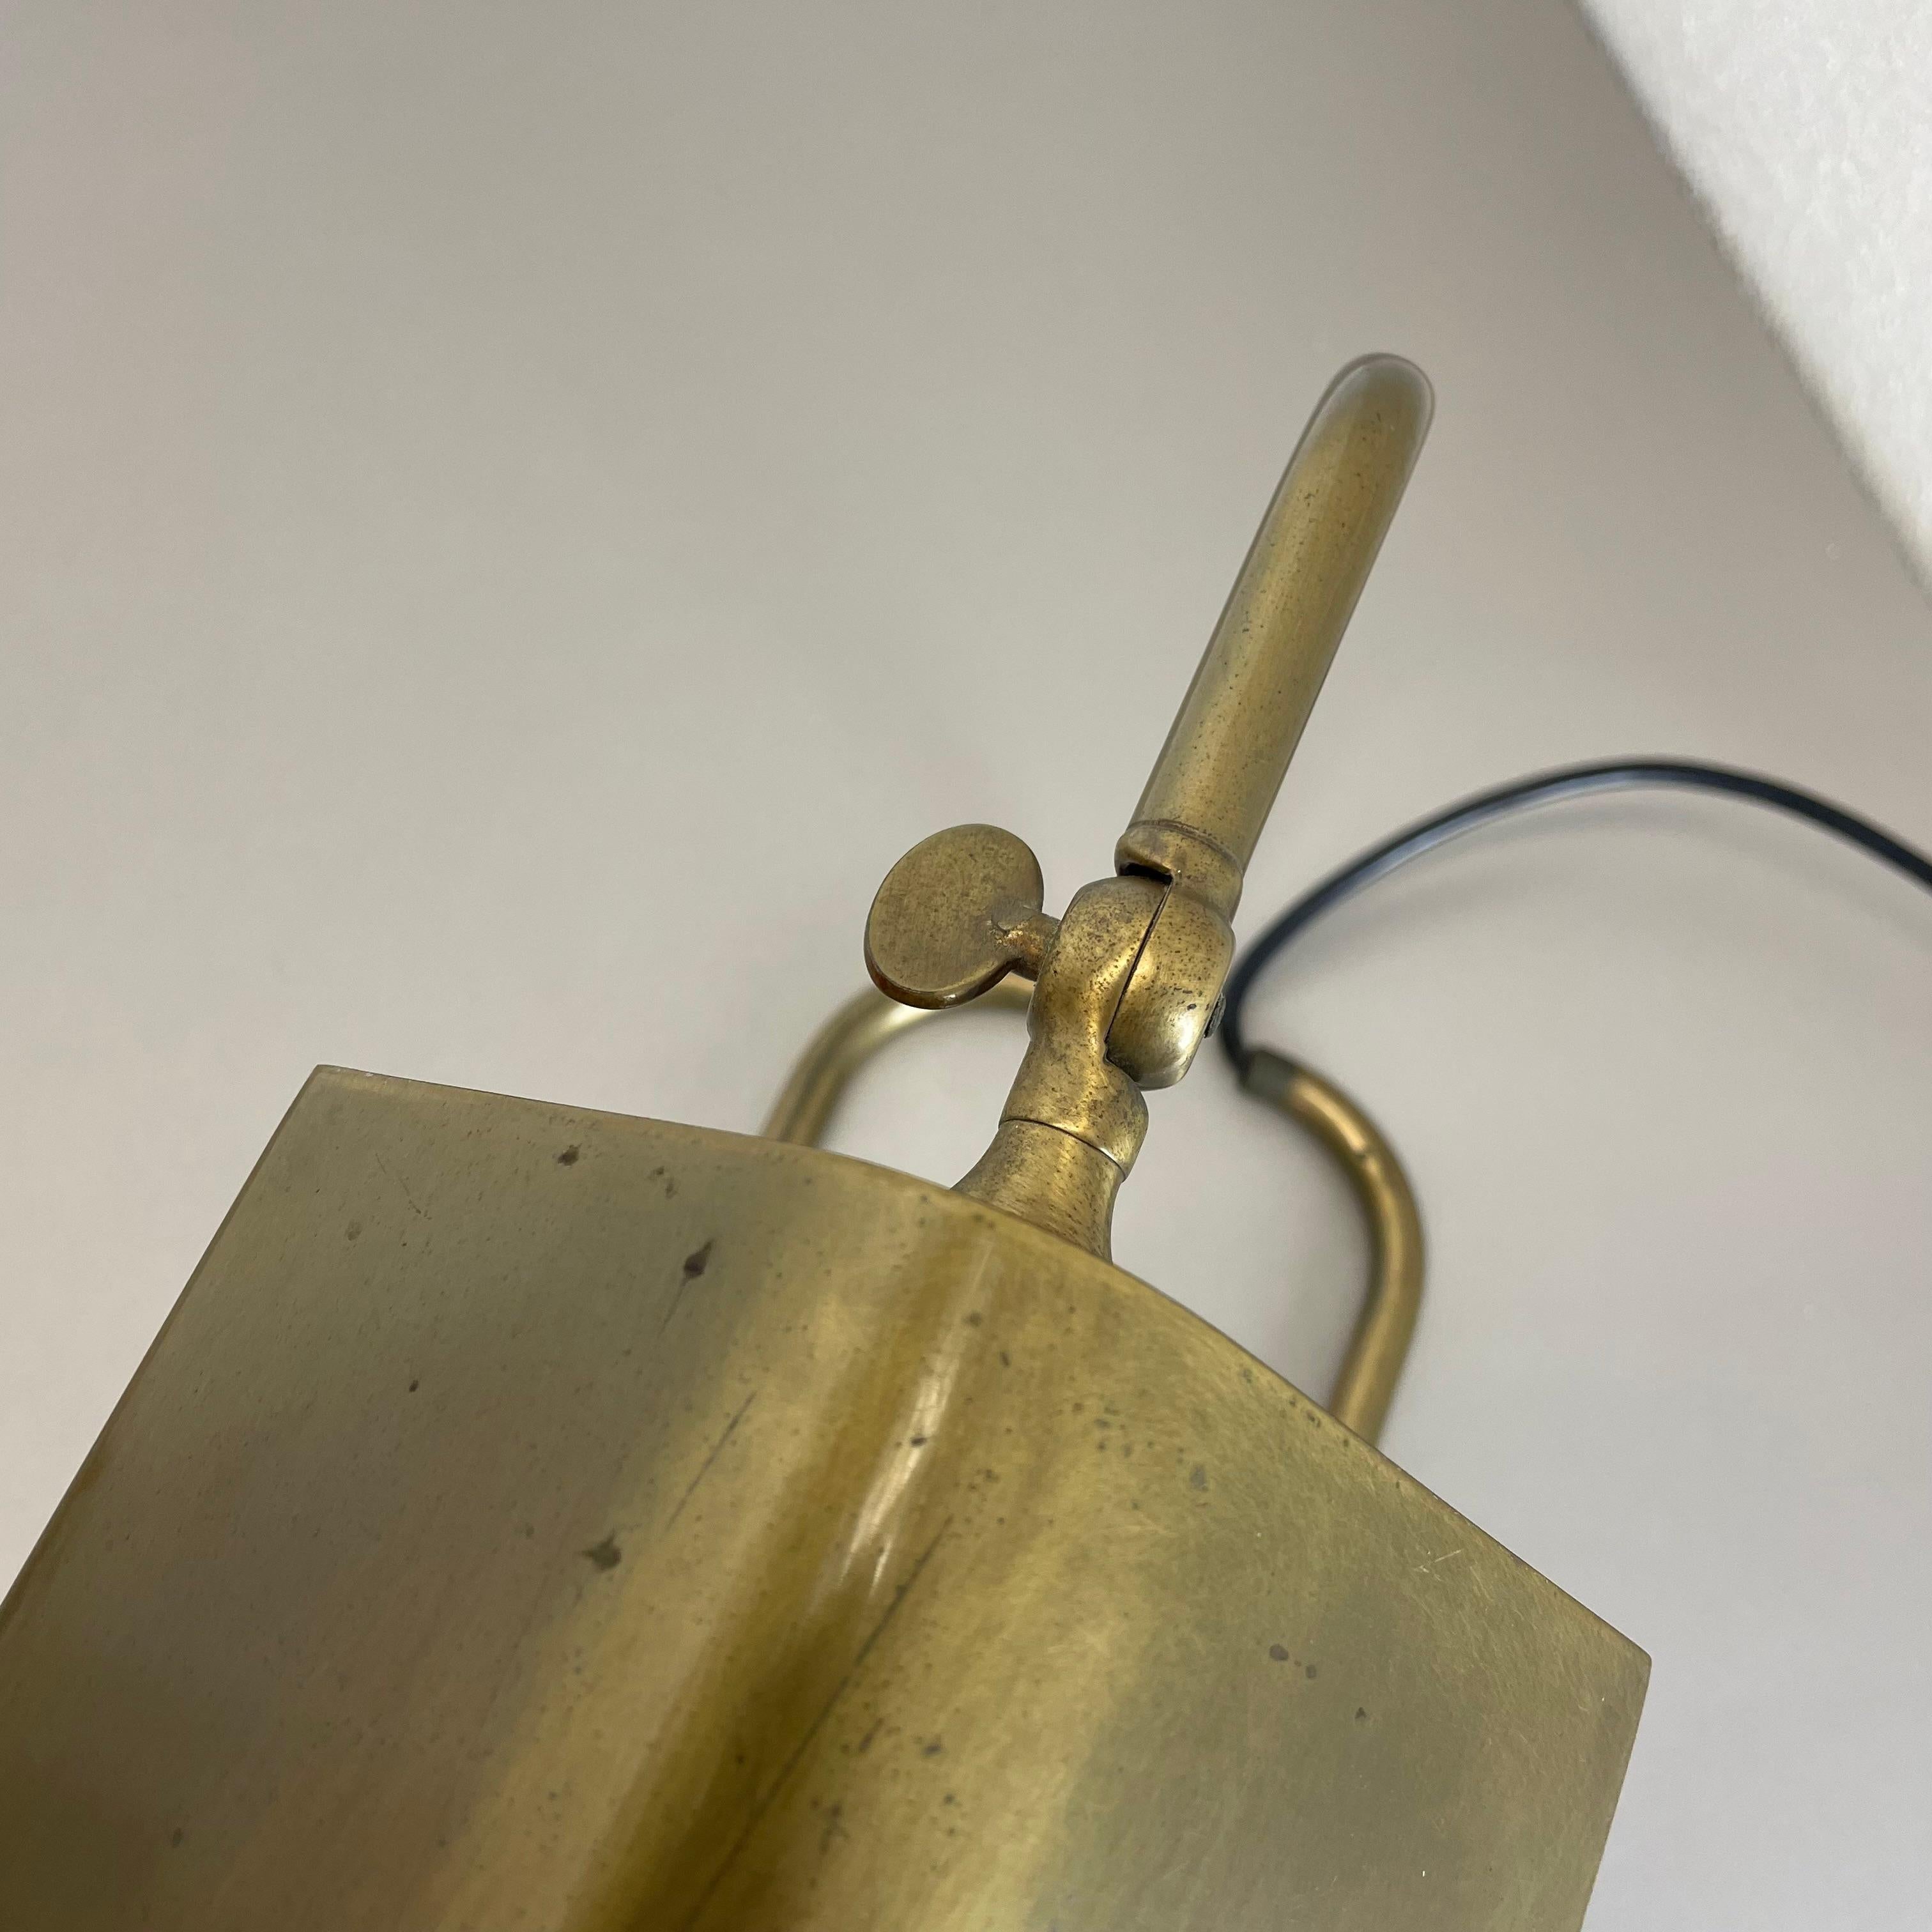 Cubic Modernist Brass Metal Table Light by Florian Schulz, Germany, 1970s For Sale 6